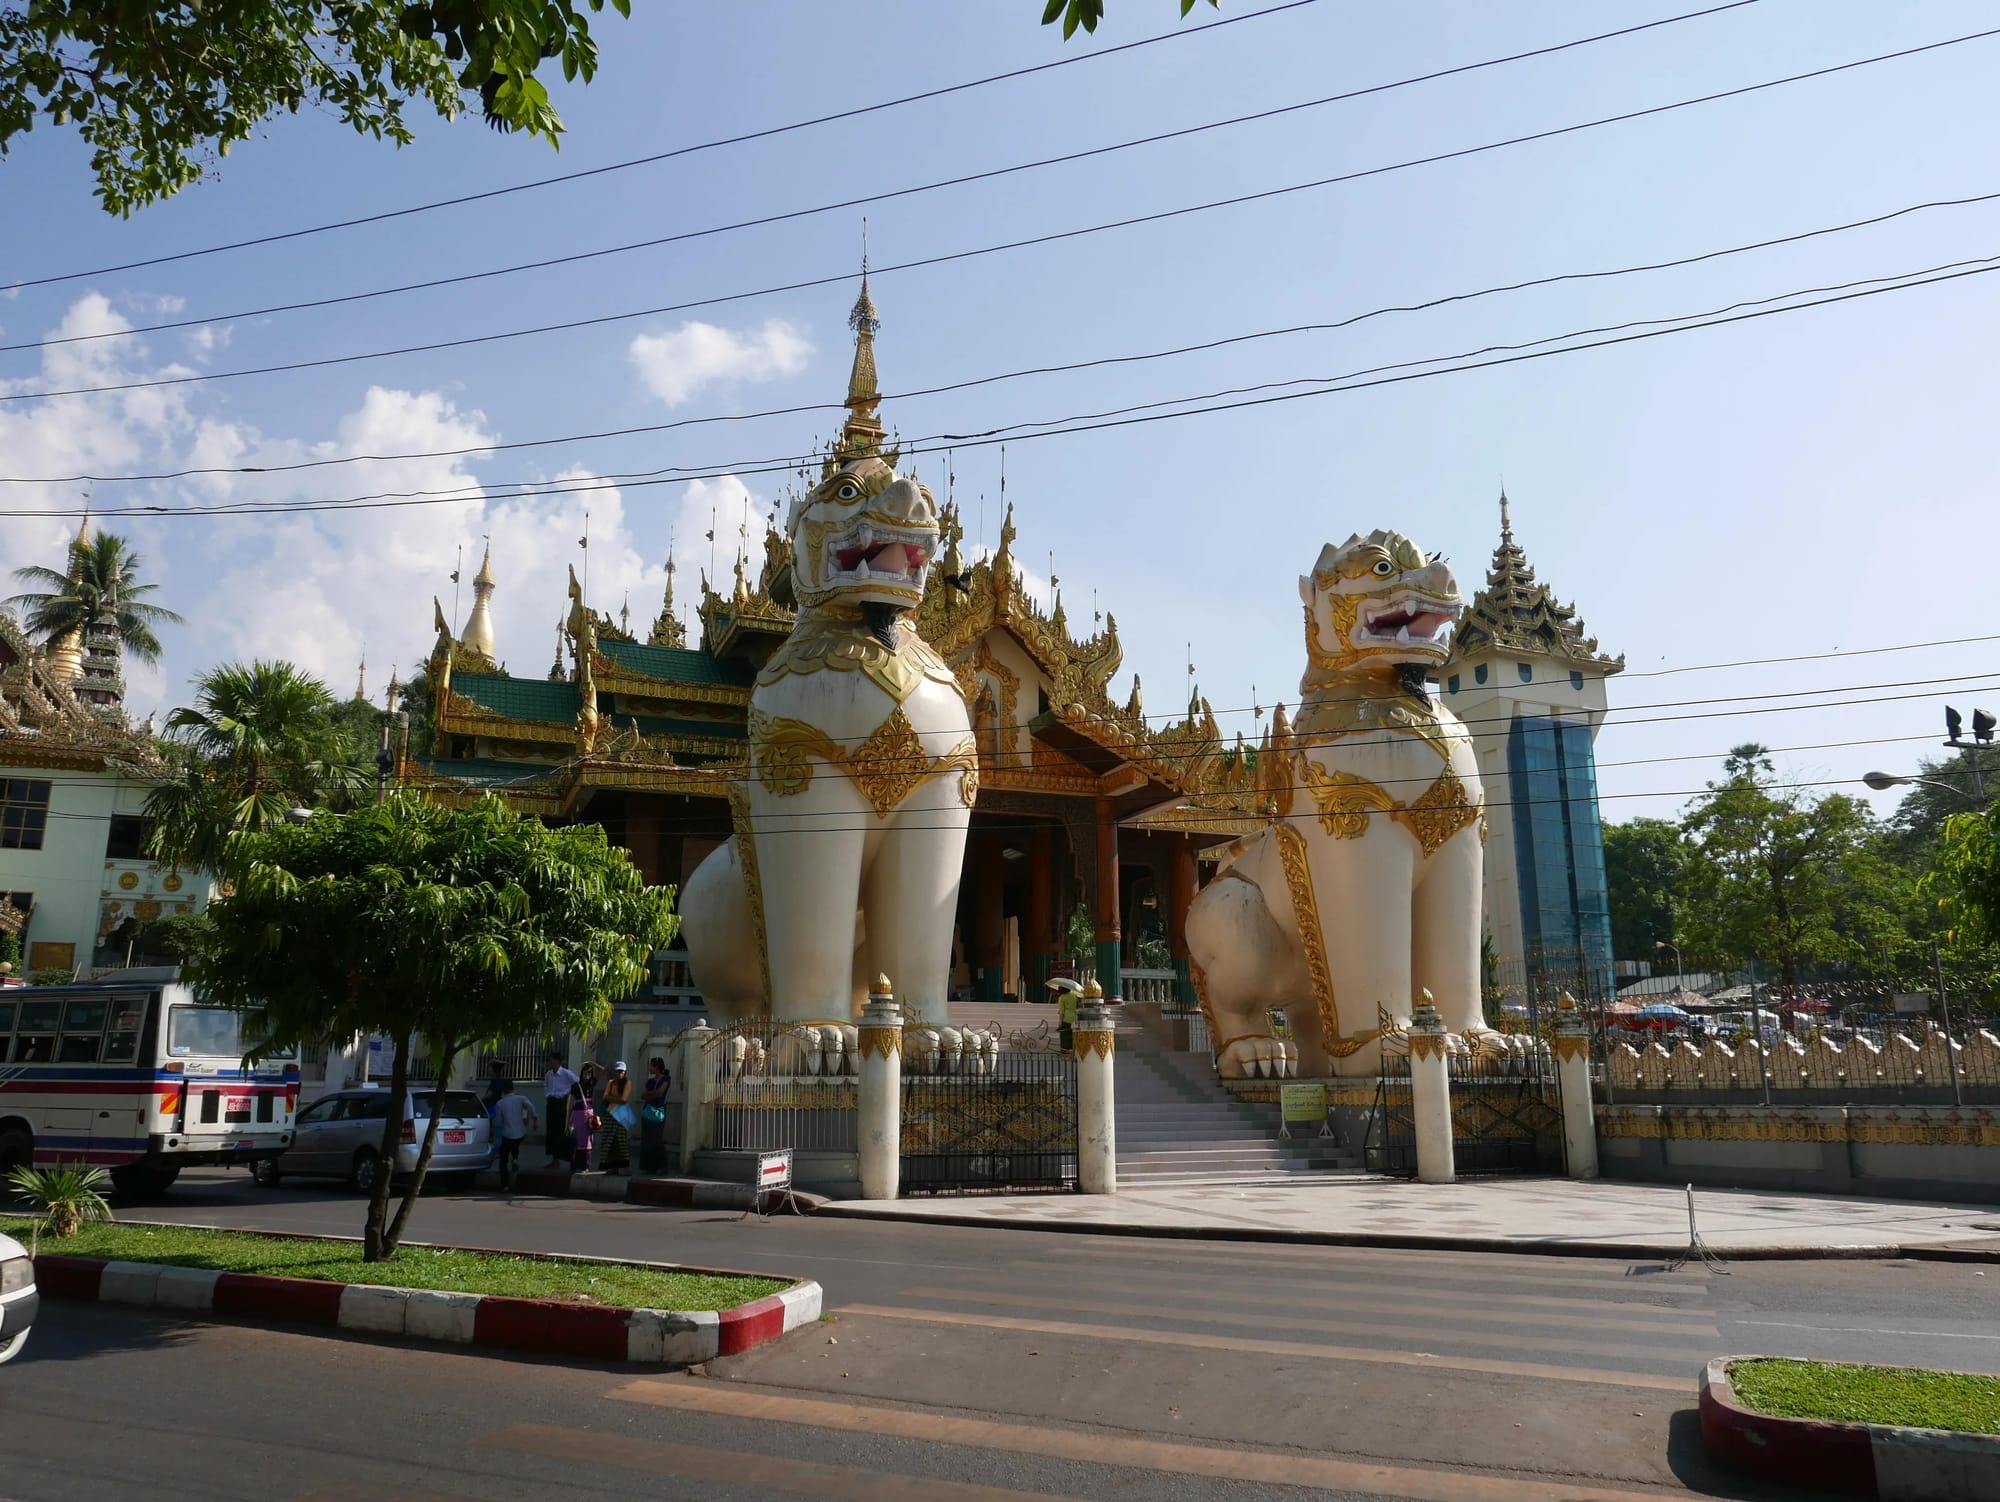 Photo by Author — north entrance to the pagoda complex